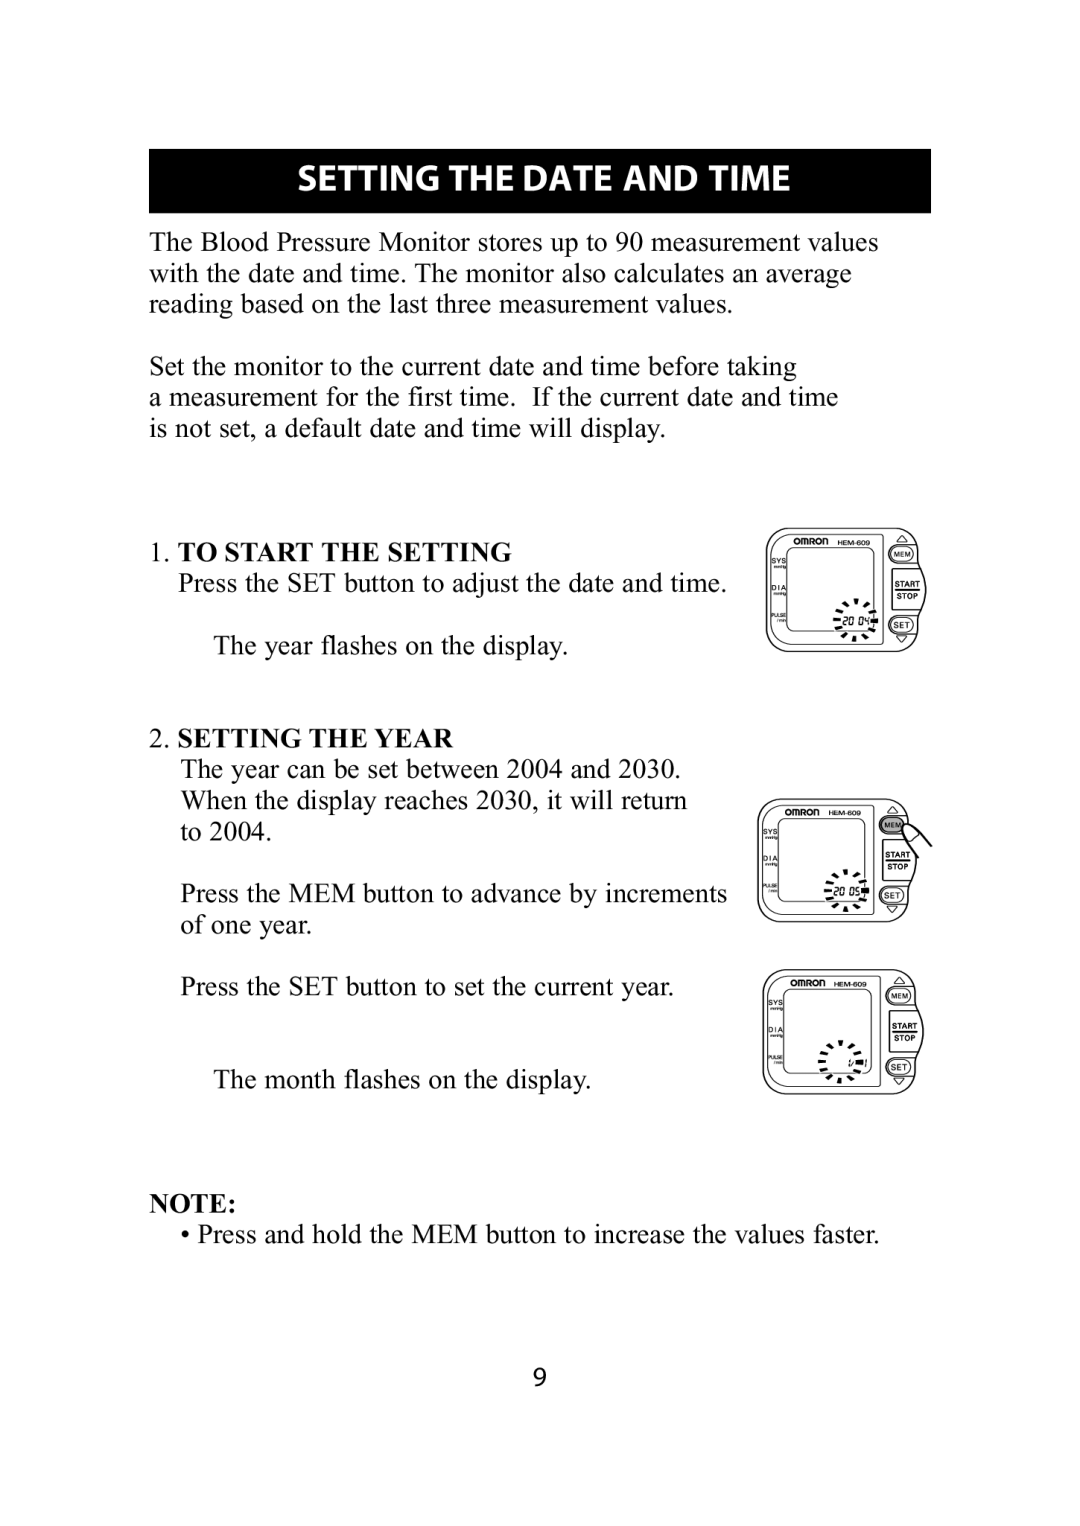 Omron Healthcare HEM-609 instruction manual Setting The Date And Time, To Start The Setting, Setting The Year 